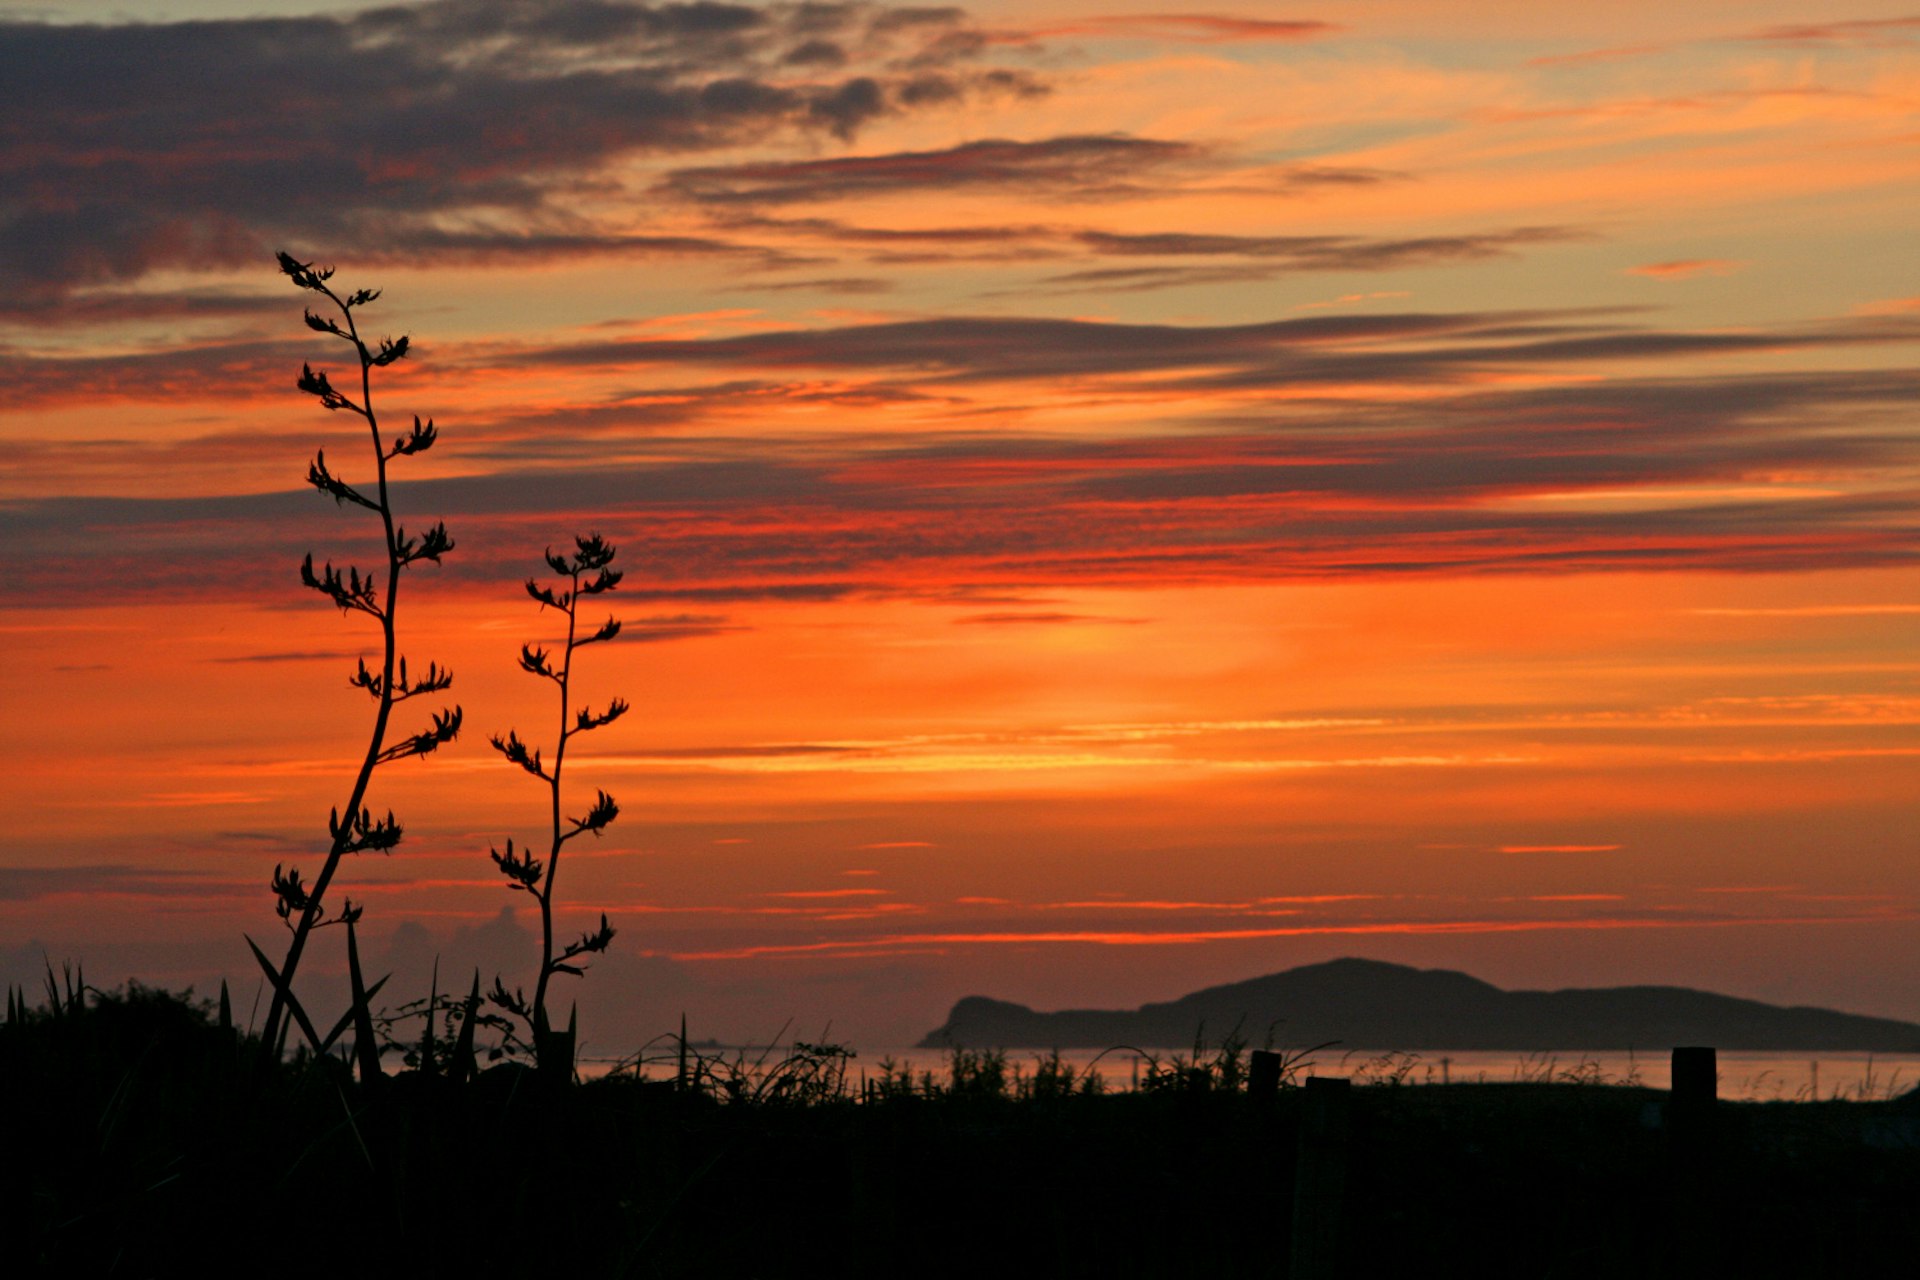 Sunset over Inishbofin, seen from Cleggan. Image by Bert Kaufman / CC BY-SA 2.0